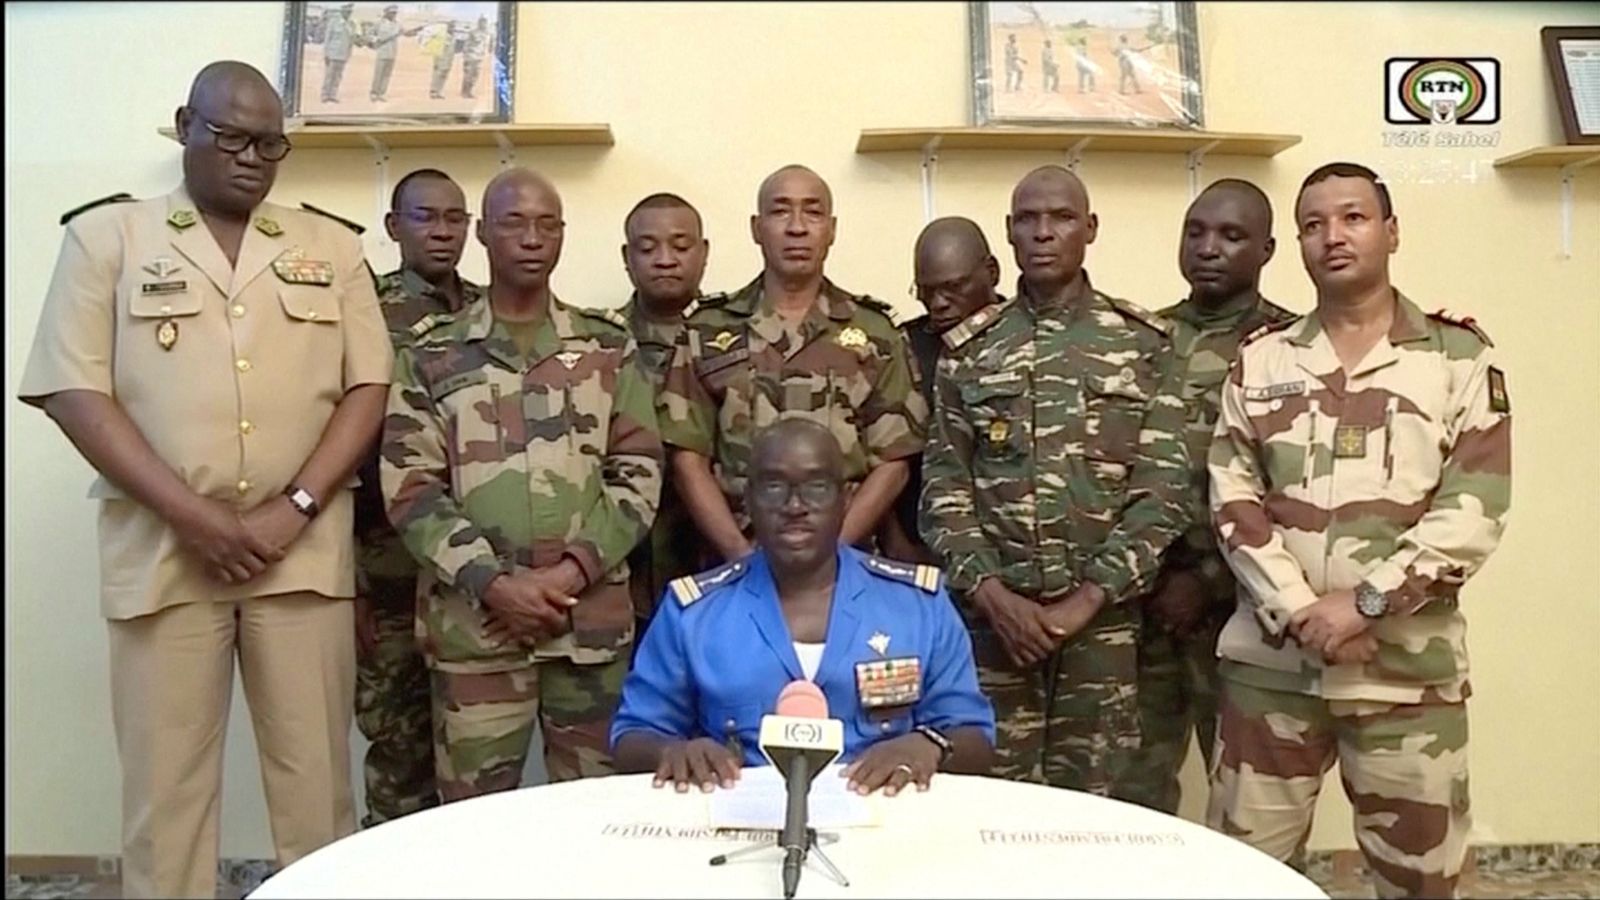 Military group in Niger claim to have overthrown President Mohamed Bazoum in attempted coup